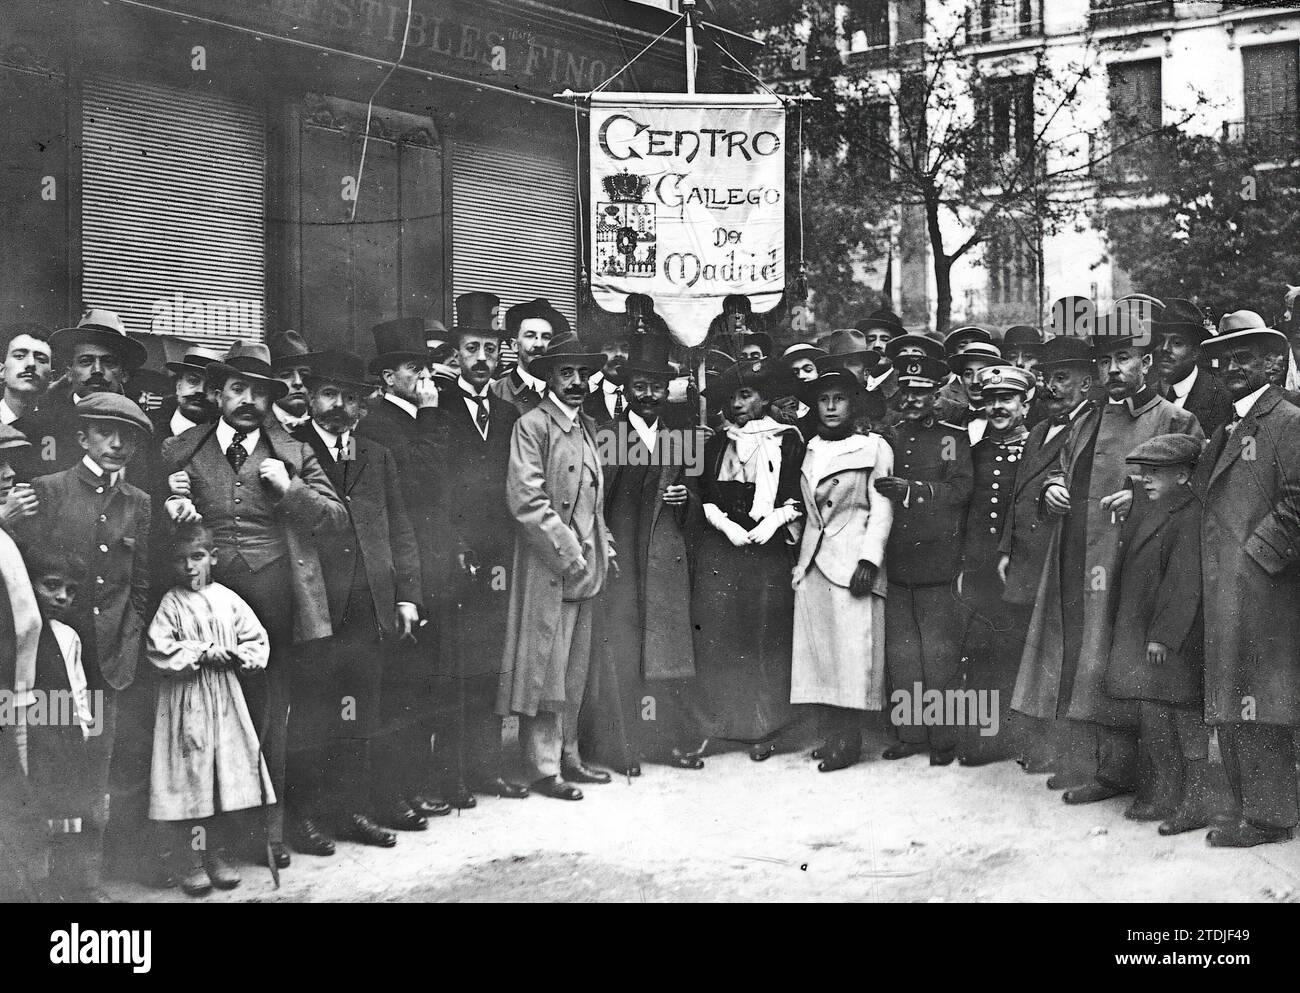 10/04/1913. Tribute to a great musician. Members of the Galician center of Madrid, among whom is the illustrious writer Mrs. Sofía Casanova (X), who yesterday morning paid tribute to the author of 'La Arbolada Gallega', notable musician Mr. Veiga, in front of the house where he lived in court. Credit: Album / Archivo ABC / Julio Duque Stock Photo